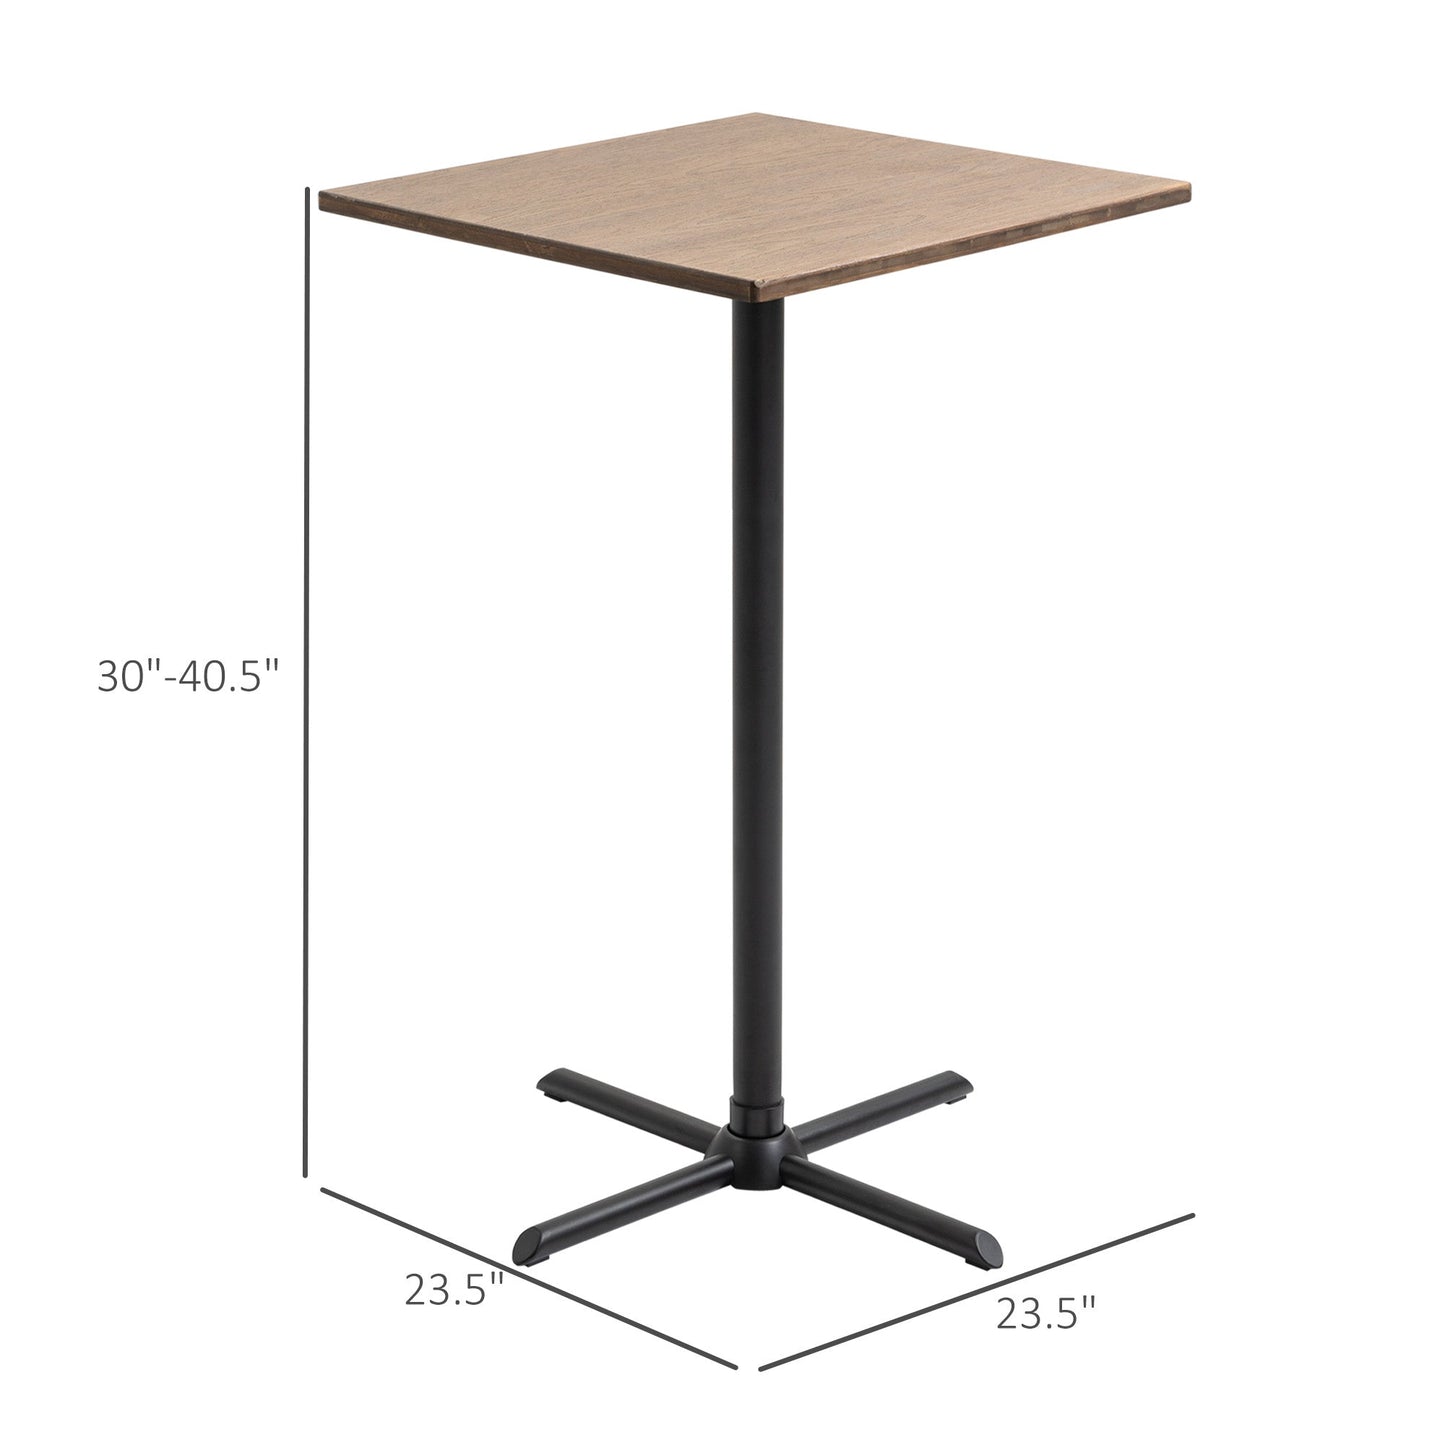 -HOMCOM 23.5" Square Bar Table, Adjustable Pub Table Dining Desk for Kitchen Living Room CafÃ© Walnut - Outdoor Style Company